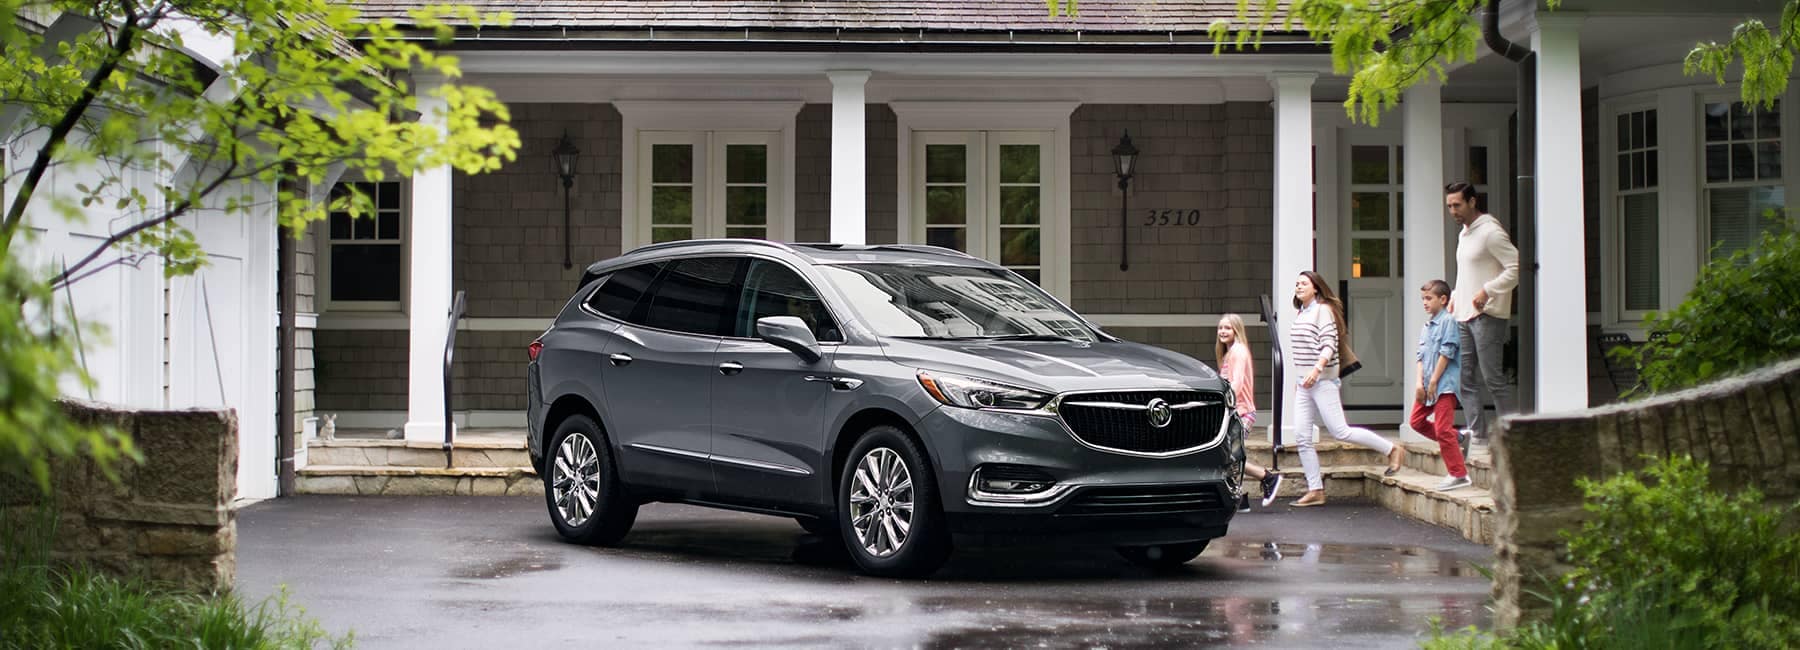 2020 Buick Enclave MPG | Nalley Buick GMC